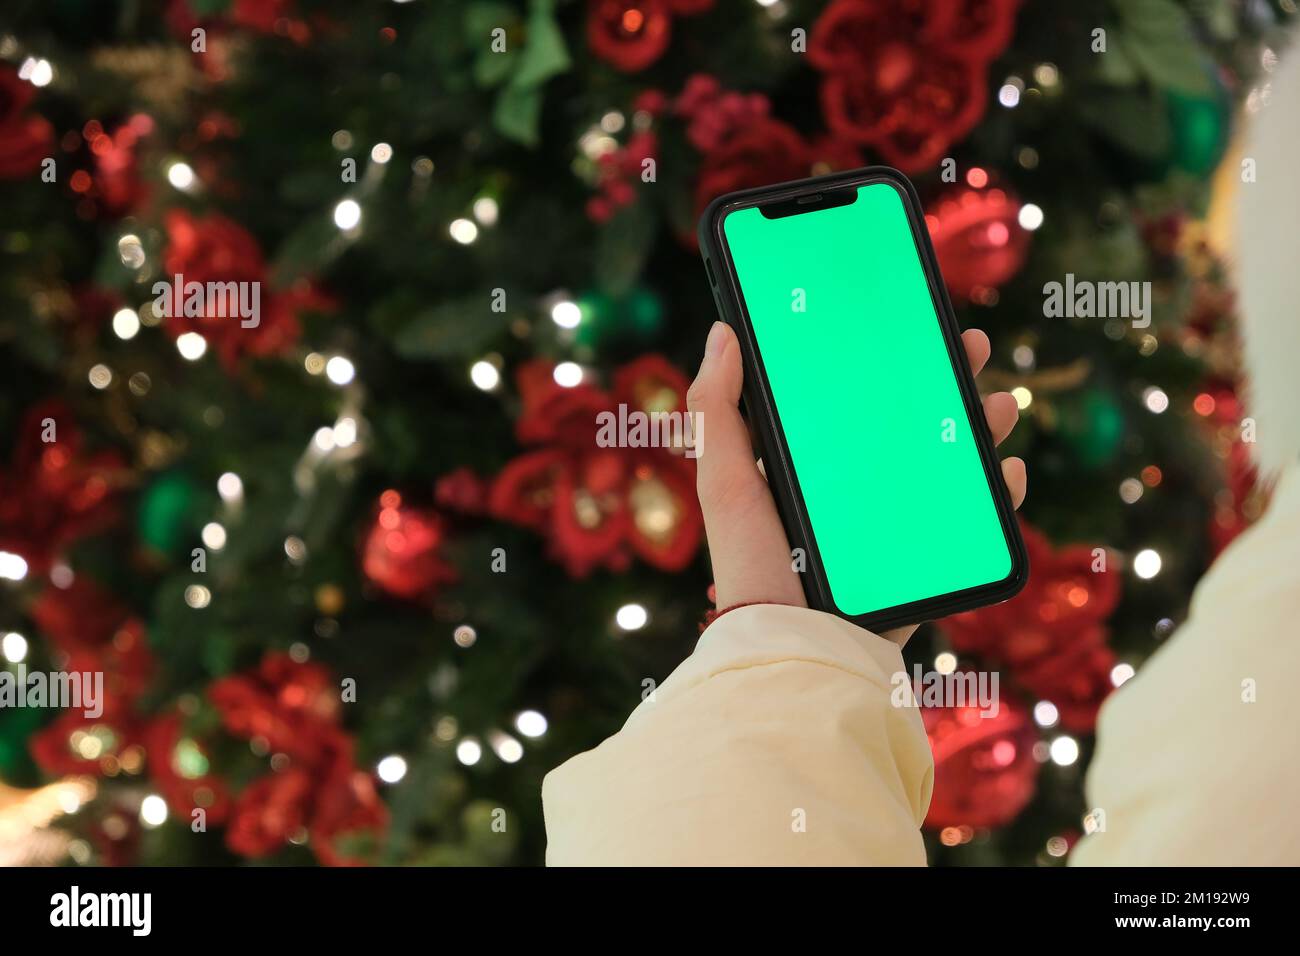 over the shoulder of hand holding green screen phone beside Christmas tree at night Stock Photo